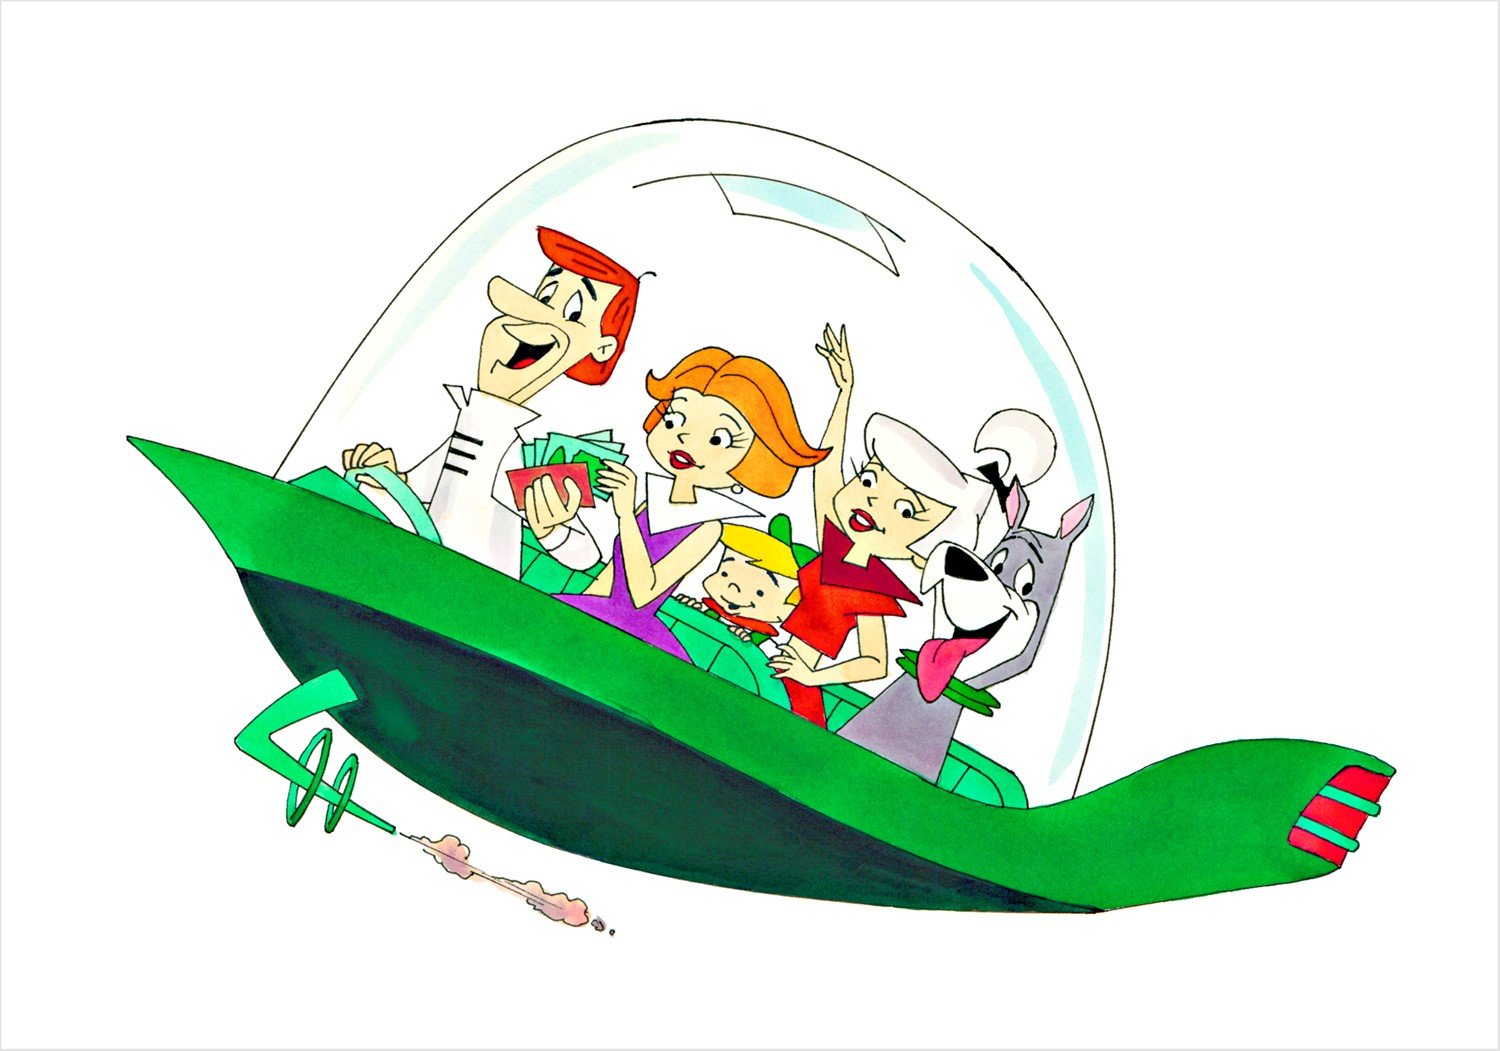 Ron Campbell’s depiction of the Jetsons’ “car.”